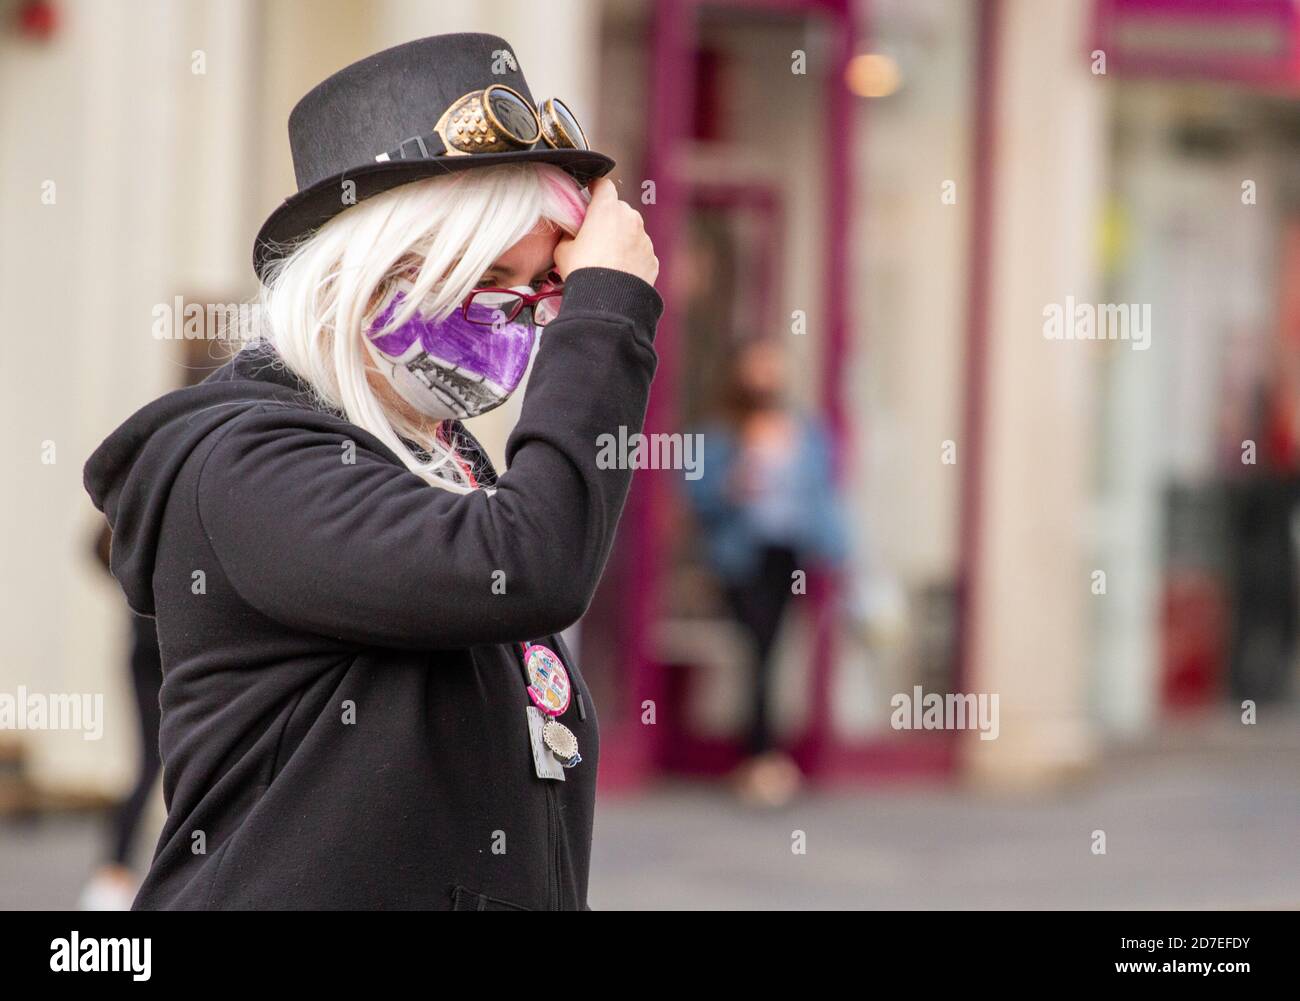 Dundee, Tayside, Scotland, UK. 22nd Oct, 2020. Covid-19 face mask wearing: Local residents wearing protective face masks in Dundee city centre which is mandatory in places such as going out shopping and socialising during the new 3rd Tier Covid-19 Lockdown restrictions. Credit: Dundee Photographics/Alamy Live News Stock Photo